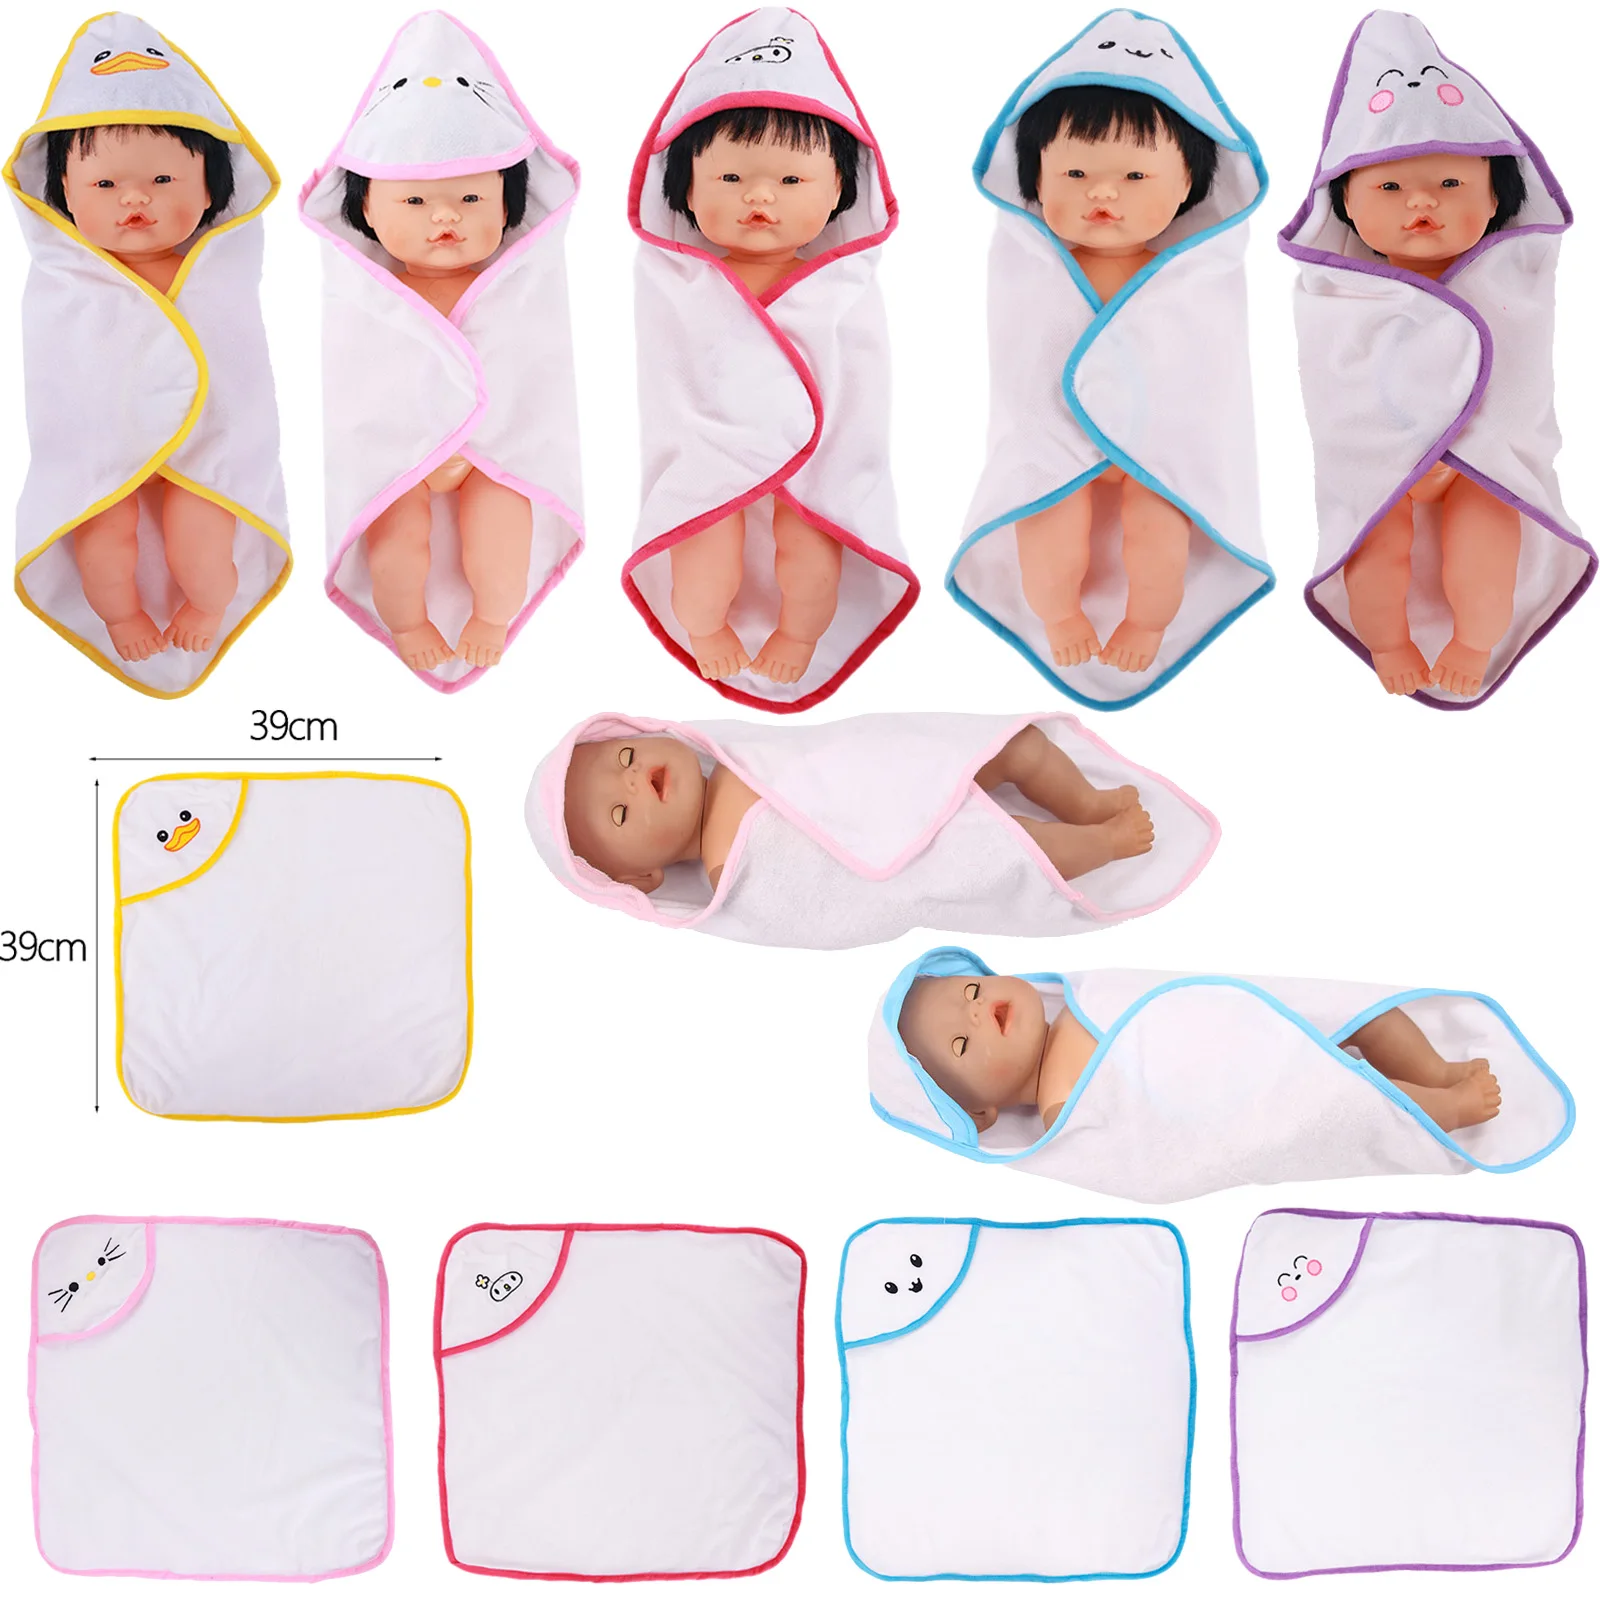 Cute Doll Bath Towel  Blanket Fit 18 Inch American&43 Cm Baby New Born Doll Reborn Our Generation Girl`s Toy Gifts